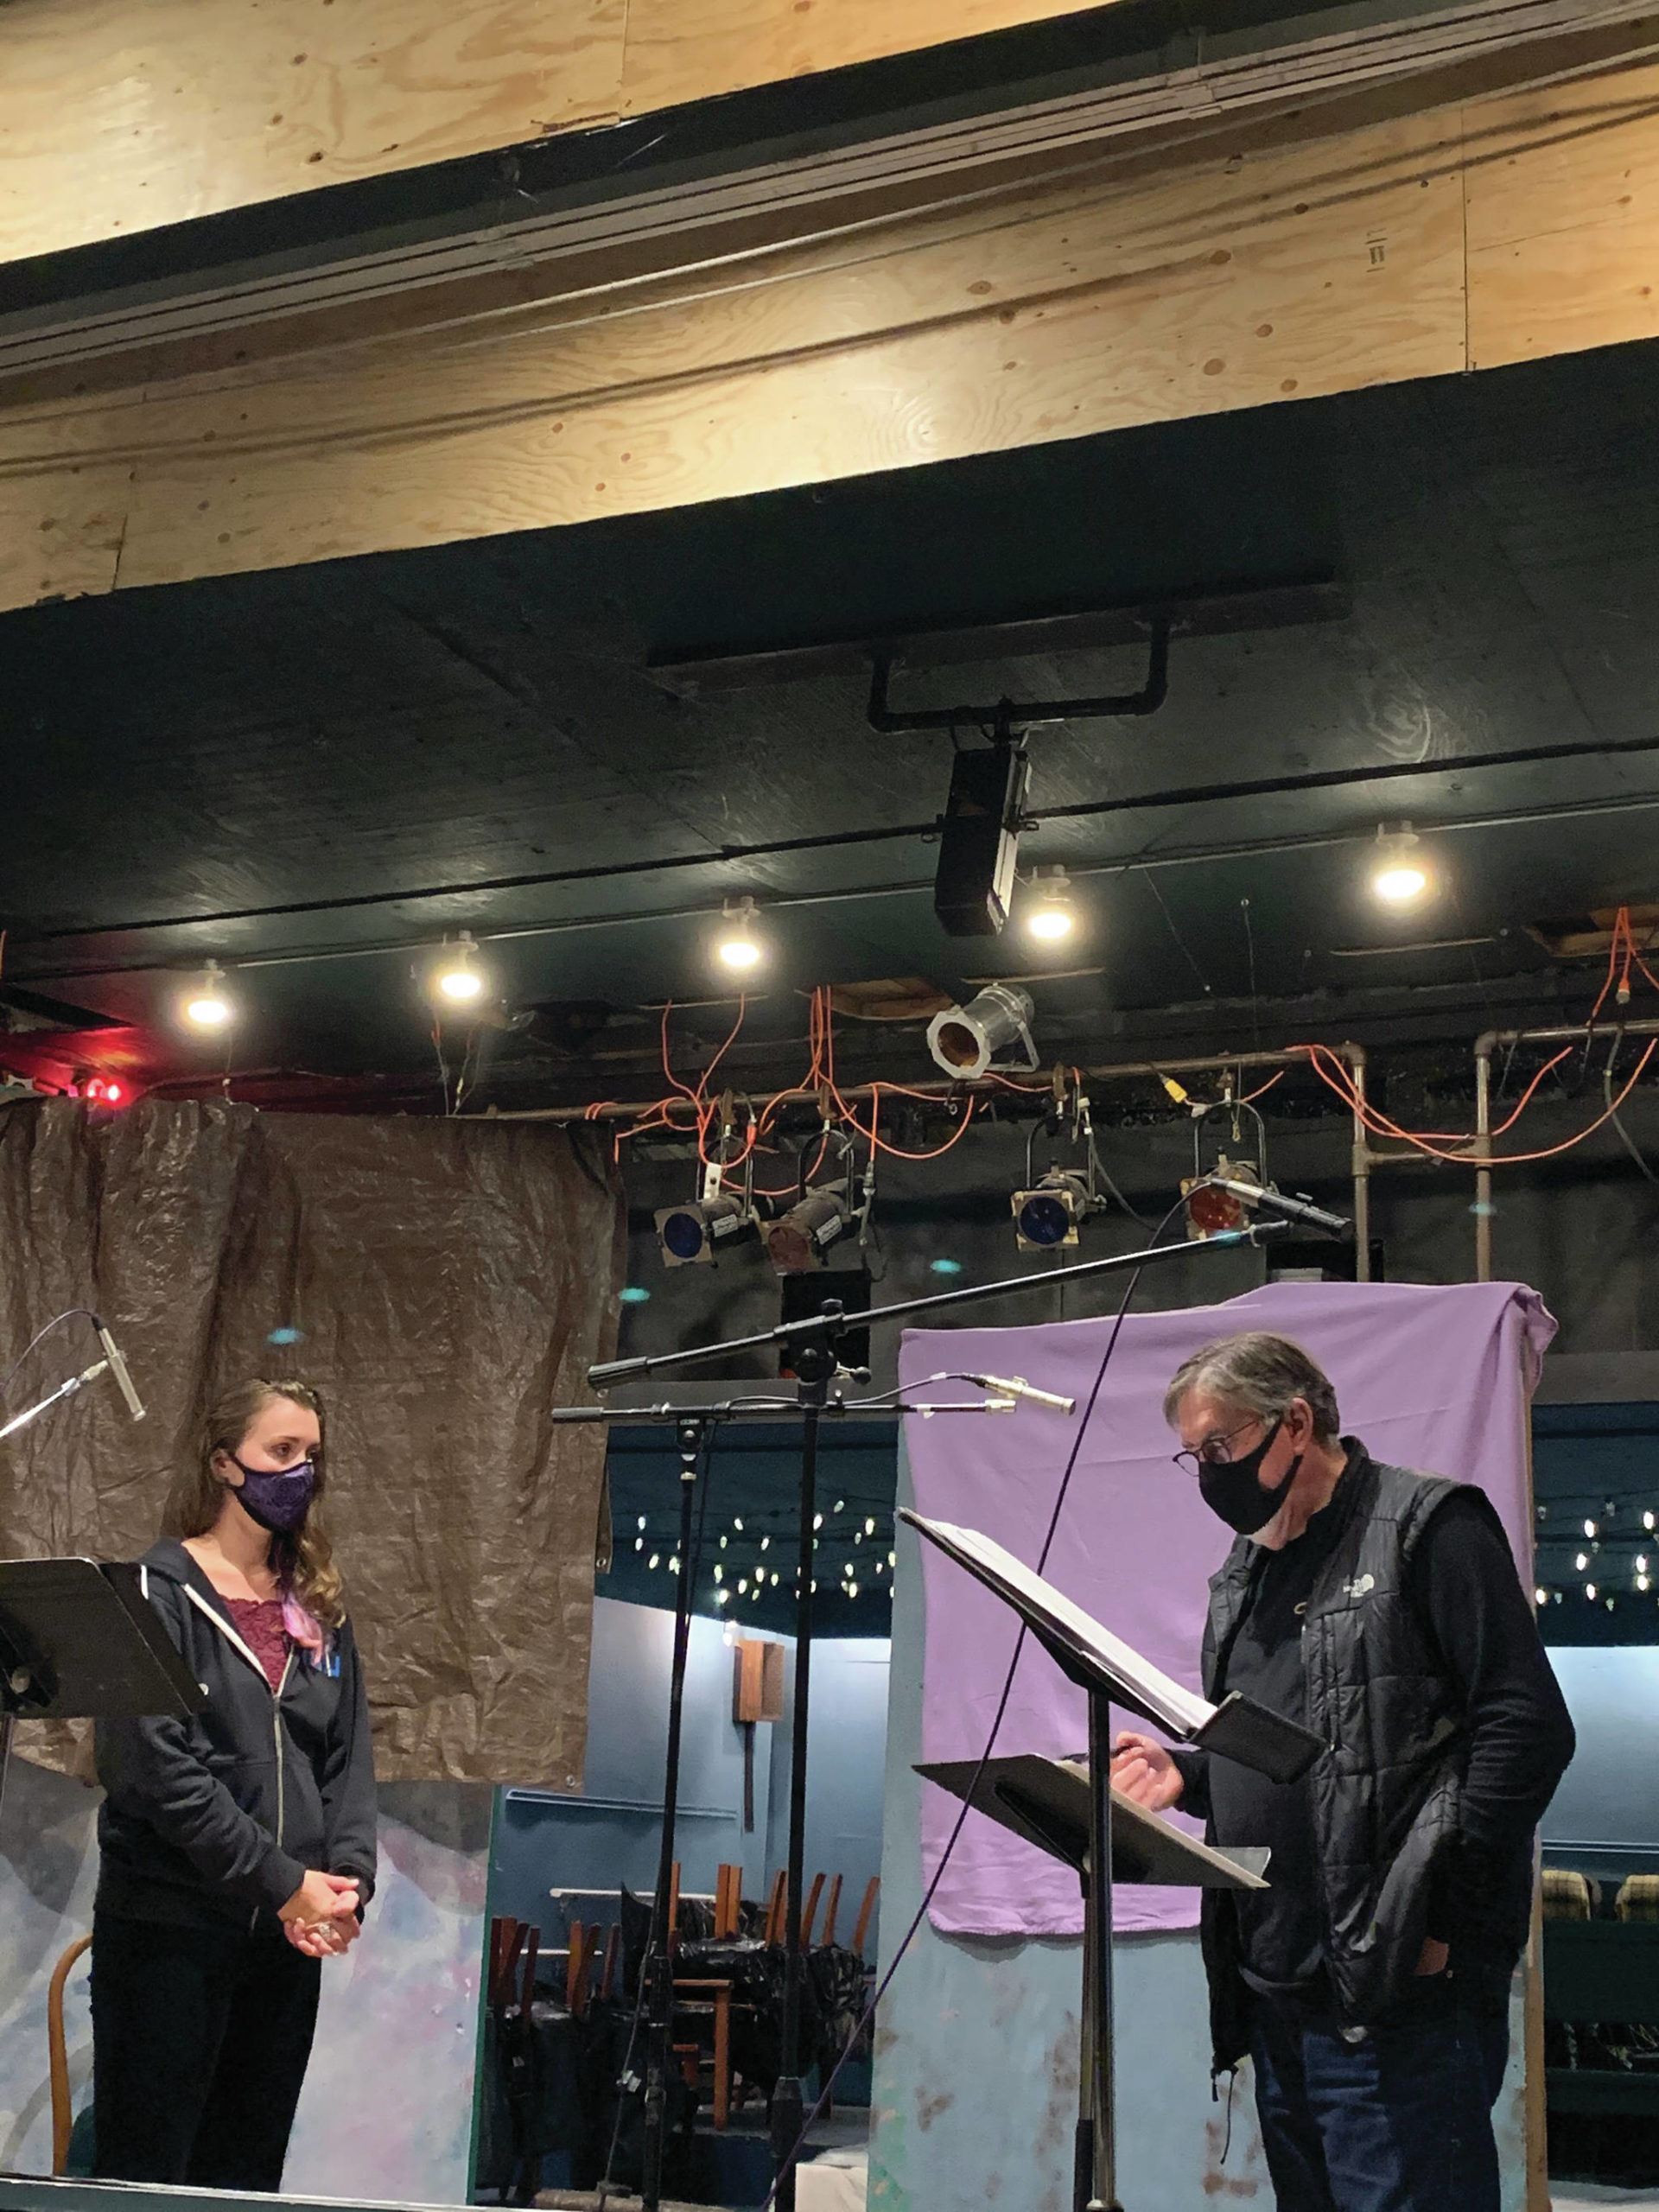 Darrell Oliver, right, and Helen-Thea Marcus, left, record “Knife Skills” at Pier One Theatre during a recording session in August in Homer, Alaska. (Photo courtesy of Lindsey Schneider)